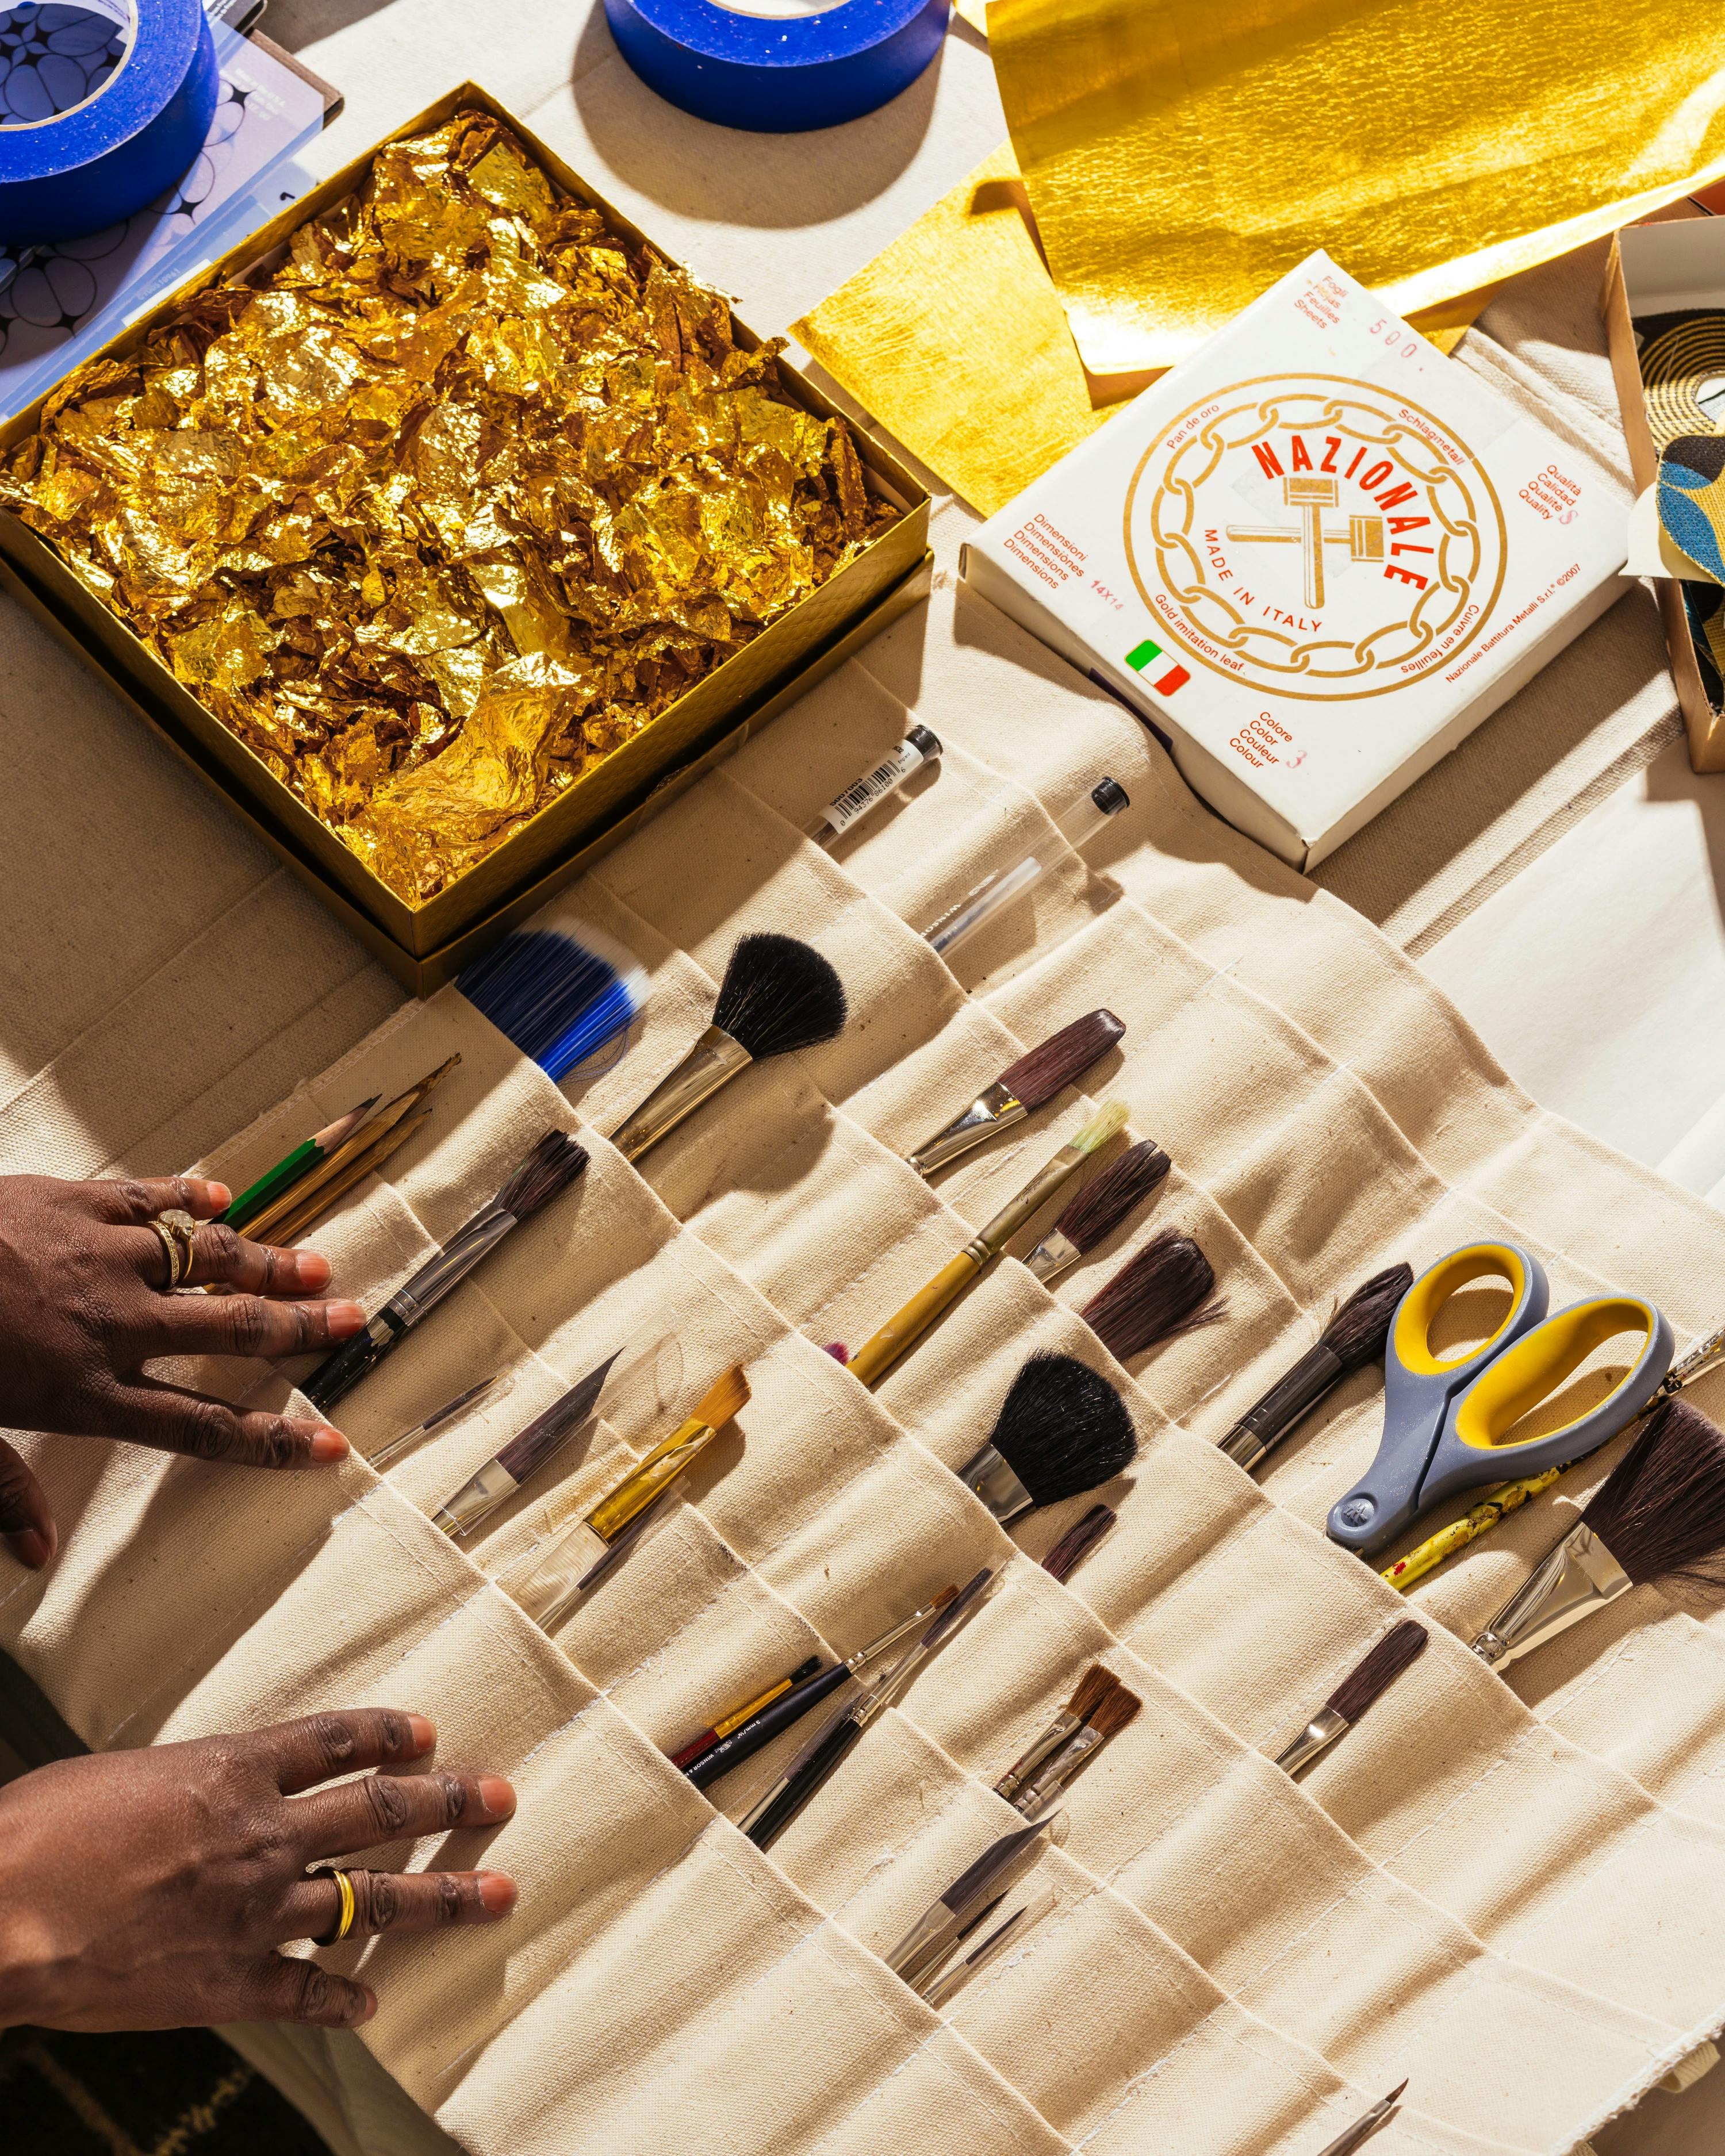 Artist Lisa Hunt with a box filled with gold leaf next to multiple paintbrushes.